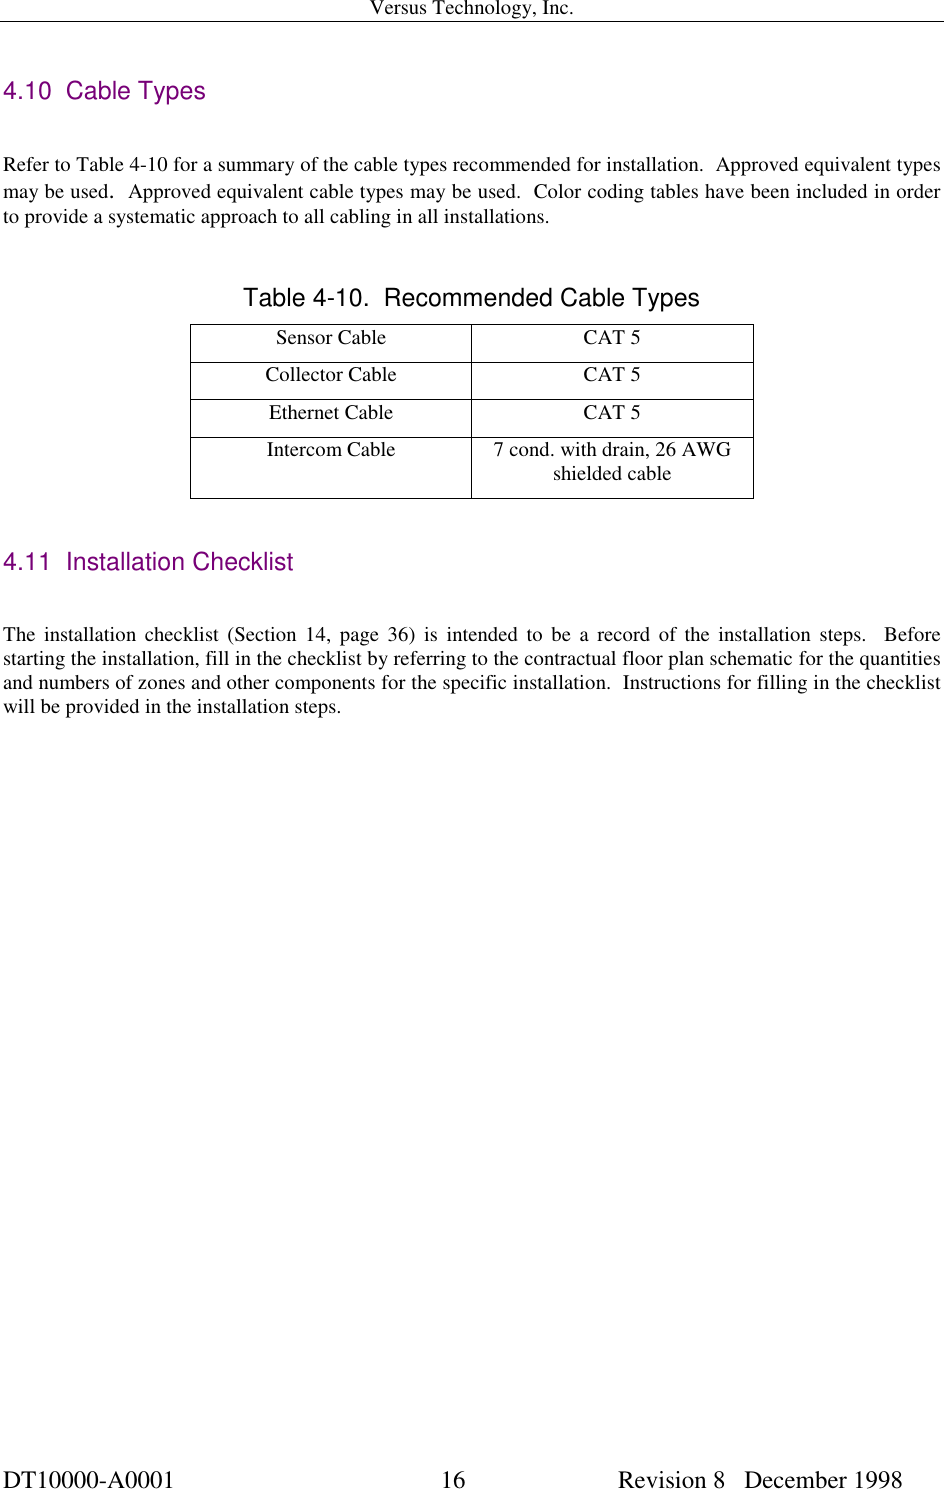 Versus Technology, Inc.DT10000-A0001 16  Revision 8   December 19984.10  Cable TypesRefer to Table 4-10 for a summary of the cable types recommended for installation.  Approved equivalent typesmay be used.  Approved equivalent cable types may be used.  Color coding tables have been included in orderto provide a systematic approach to all cabling in all installations.Table 4-10.  Recommended Cable TypesSensor Cable CAT 5Collector Cable CAT 5Ethernet Cable CAT 5Intercom Cable 7 cond. with drain, 26 AWGshielded cable4.11  Installation ChecklistThe installation checklist (Section 14, page 36) is intended to be a record of the installation steps.  Beforestarting the installation, fill in the checklist by referring to the contractual floor plan schematic for the quantitiesand numbers of zones and other components for the specific installation.  Instructions for filling in the checklistwill be provided in the installation steps.